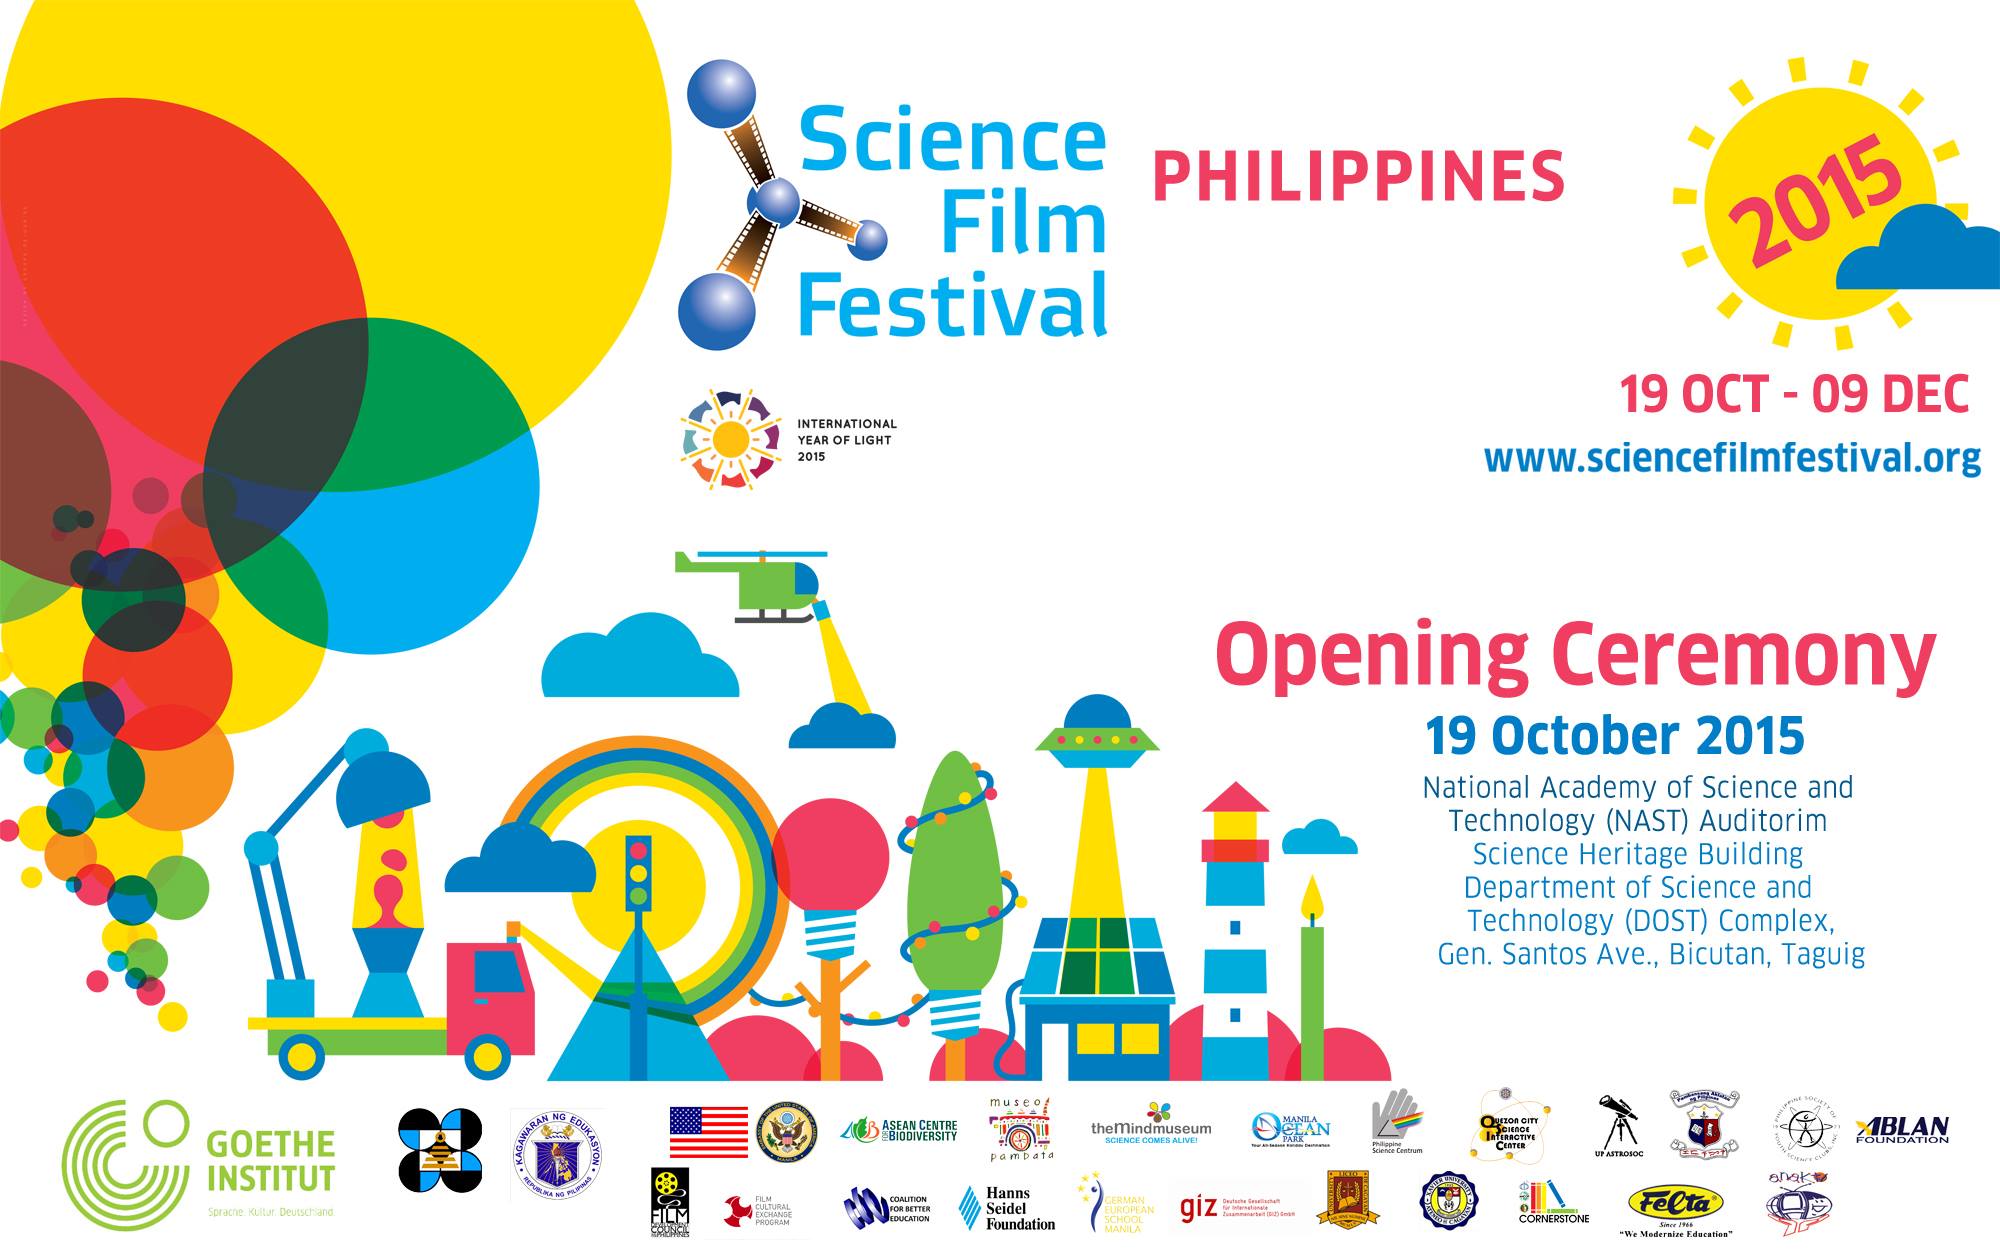 Science Film Festival Philippines Only one week left until the Science Film Festival Philippines. We can't wait! Don’t miss our Opening Ceremony on October 19 at 9:00am: ---- ANNOUNCEMENT: Due to the stormy weather, the opening of the Science Film Festival is postponed to Wednesday, October 21, same time, same place!